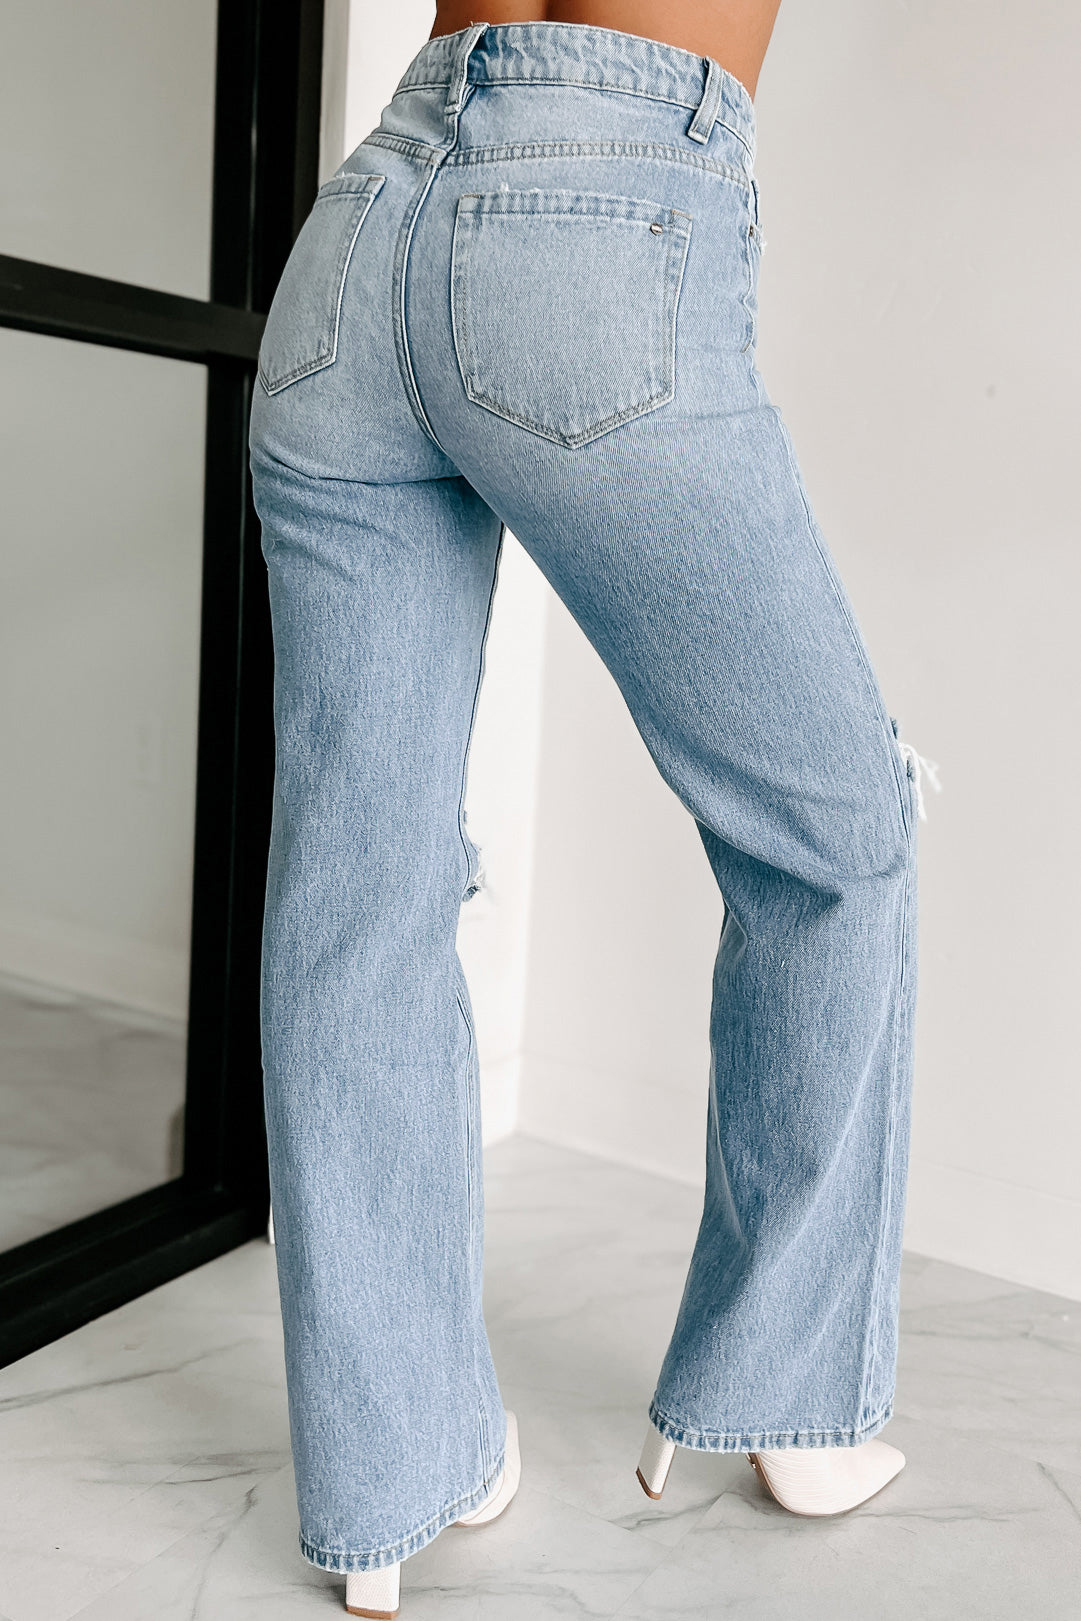 Vintage Bell Bottoms Flare Jeans for Women 90s High Waist Ripped Distressed  Wide Leg High Rise Denim Pants